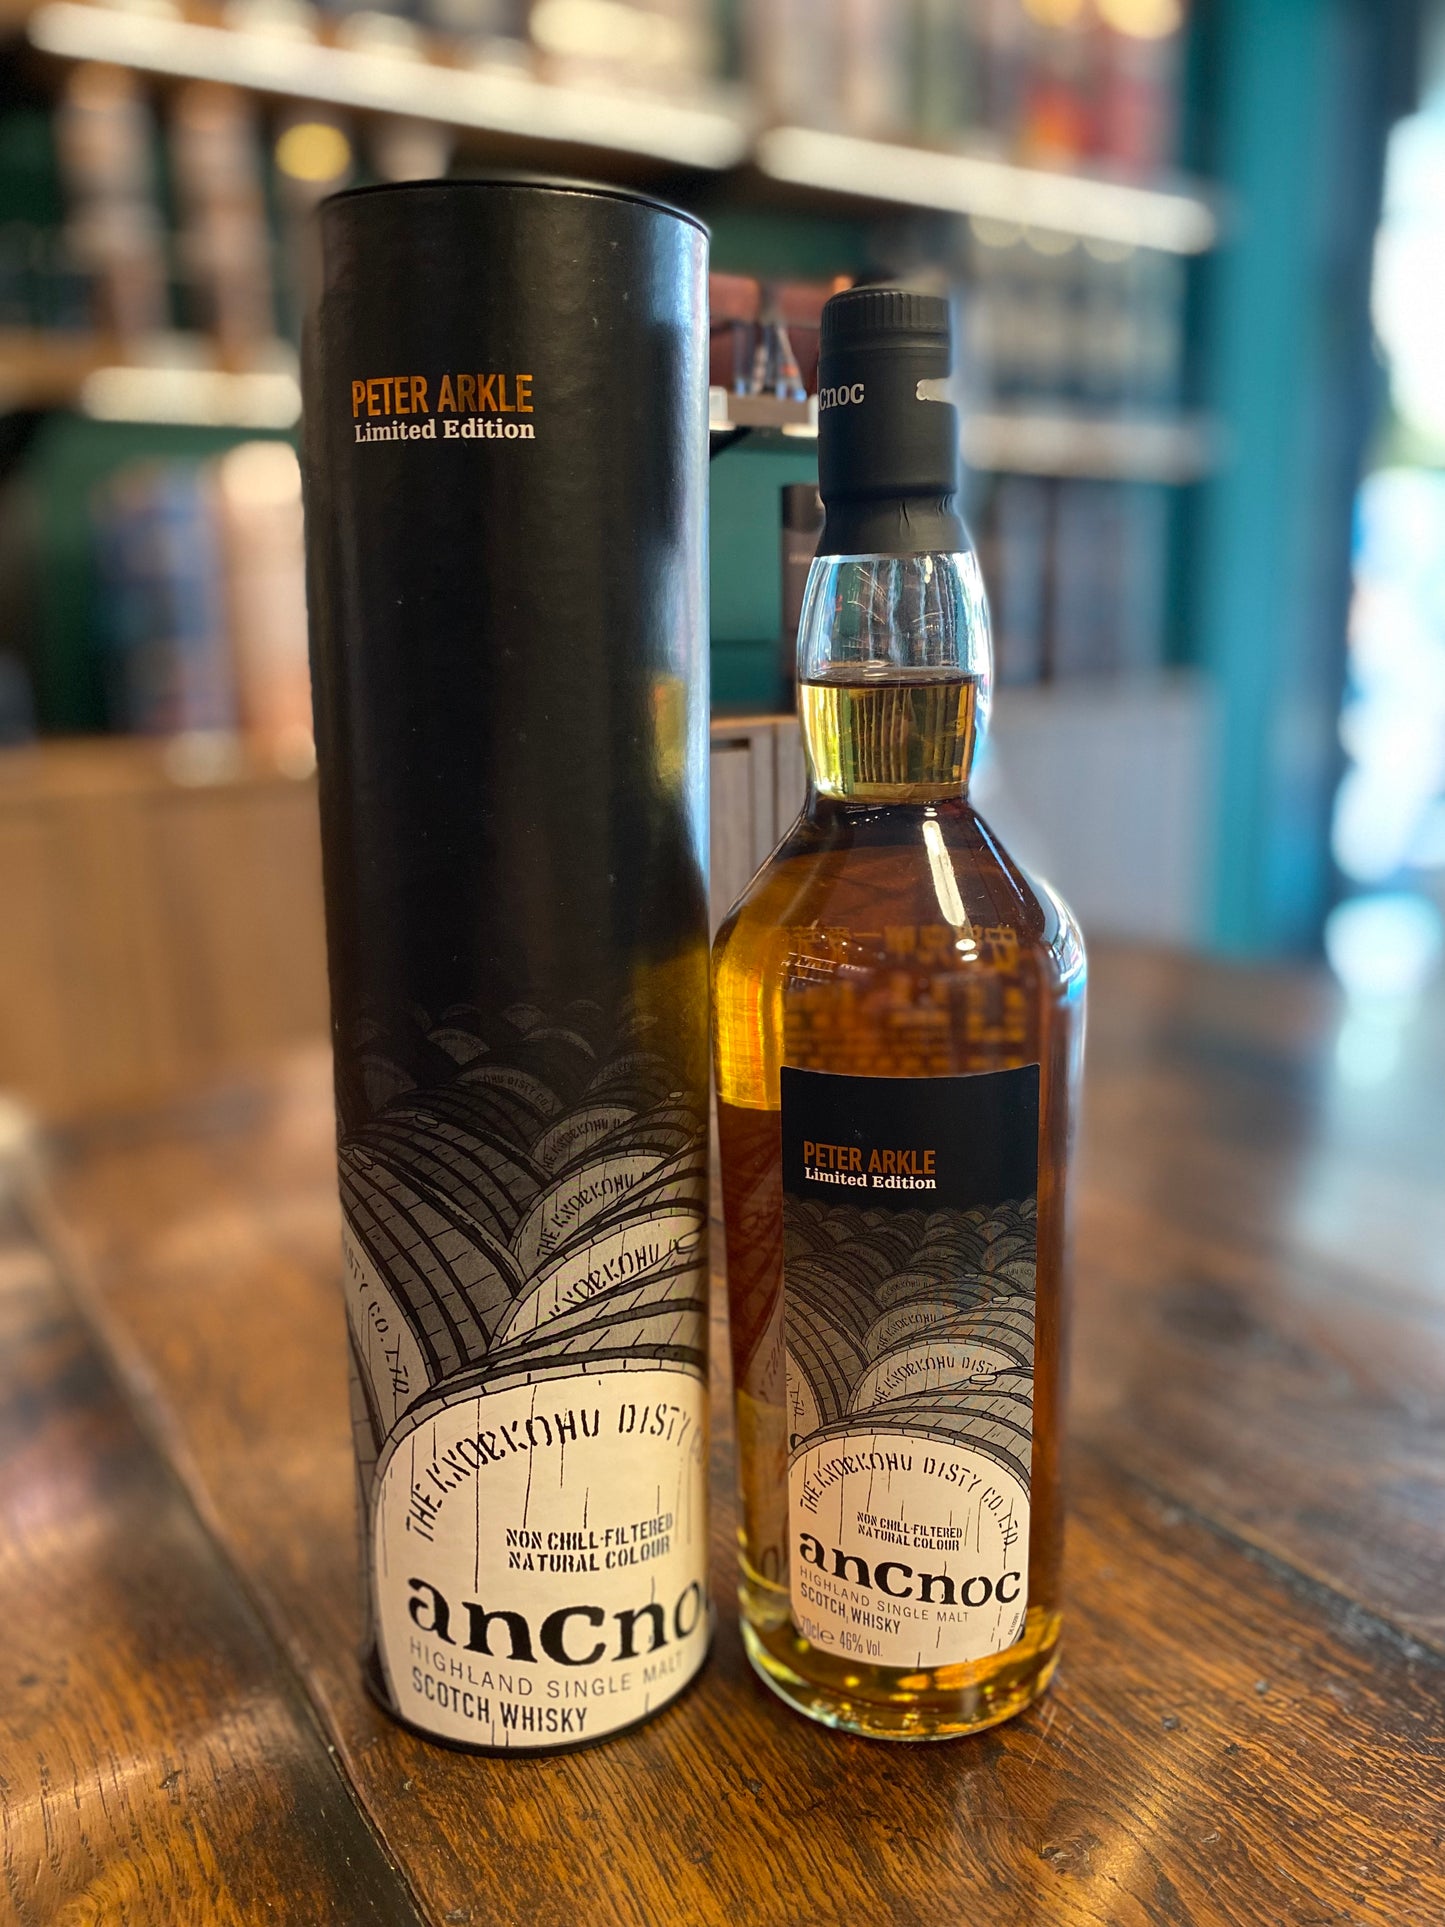 AnCnoc Peter Arkle 2nd Edition - Casks Whisky,700ml,46%